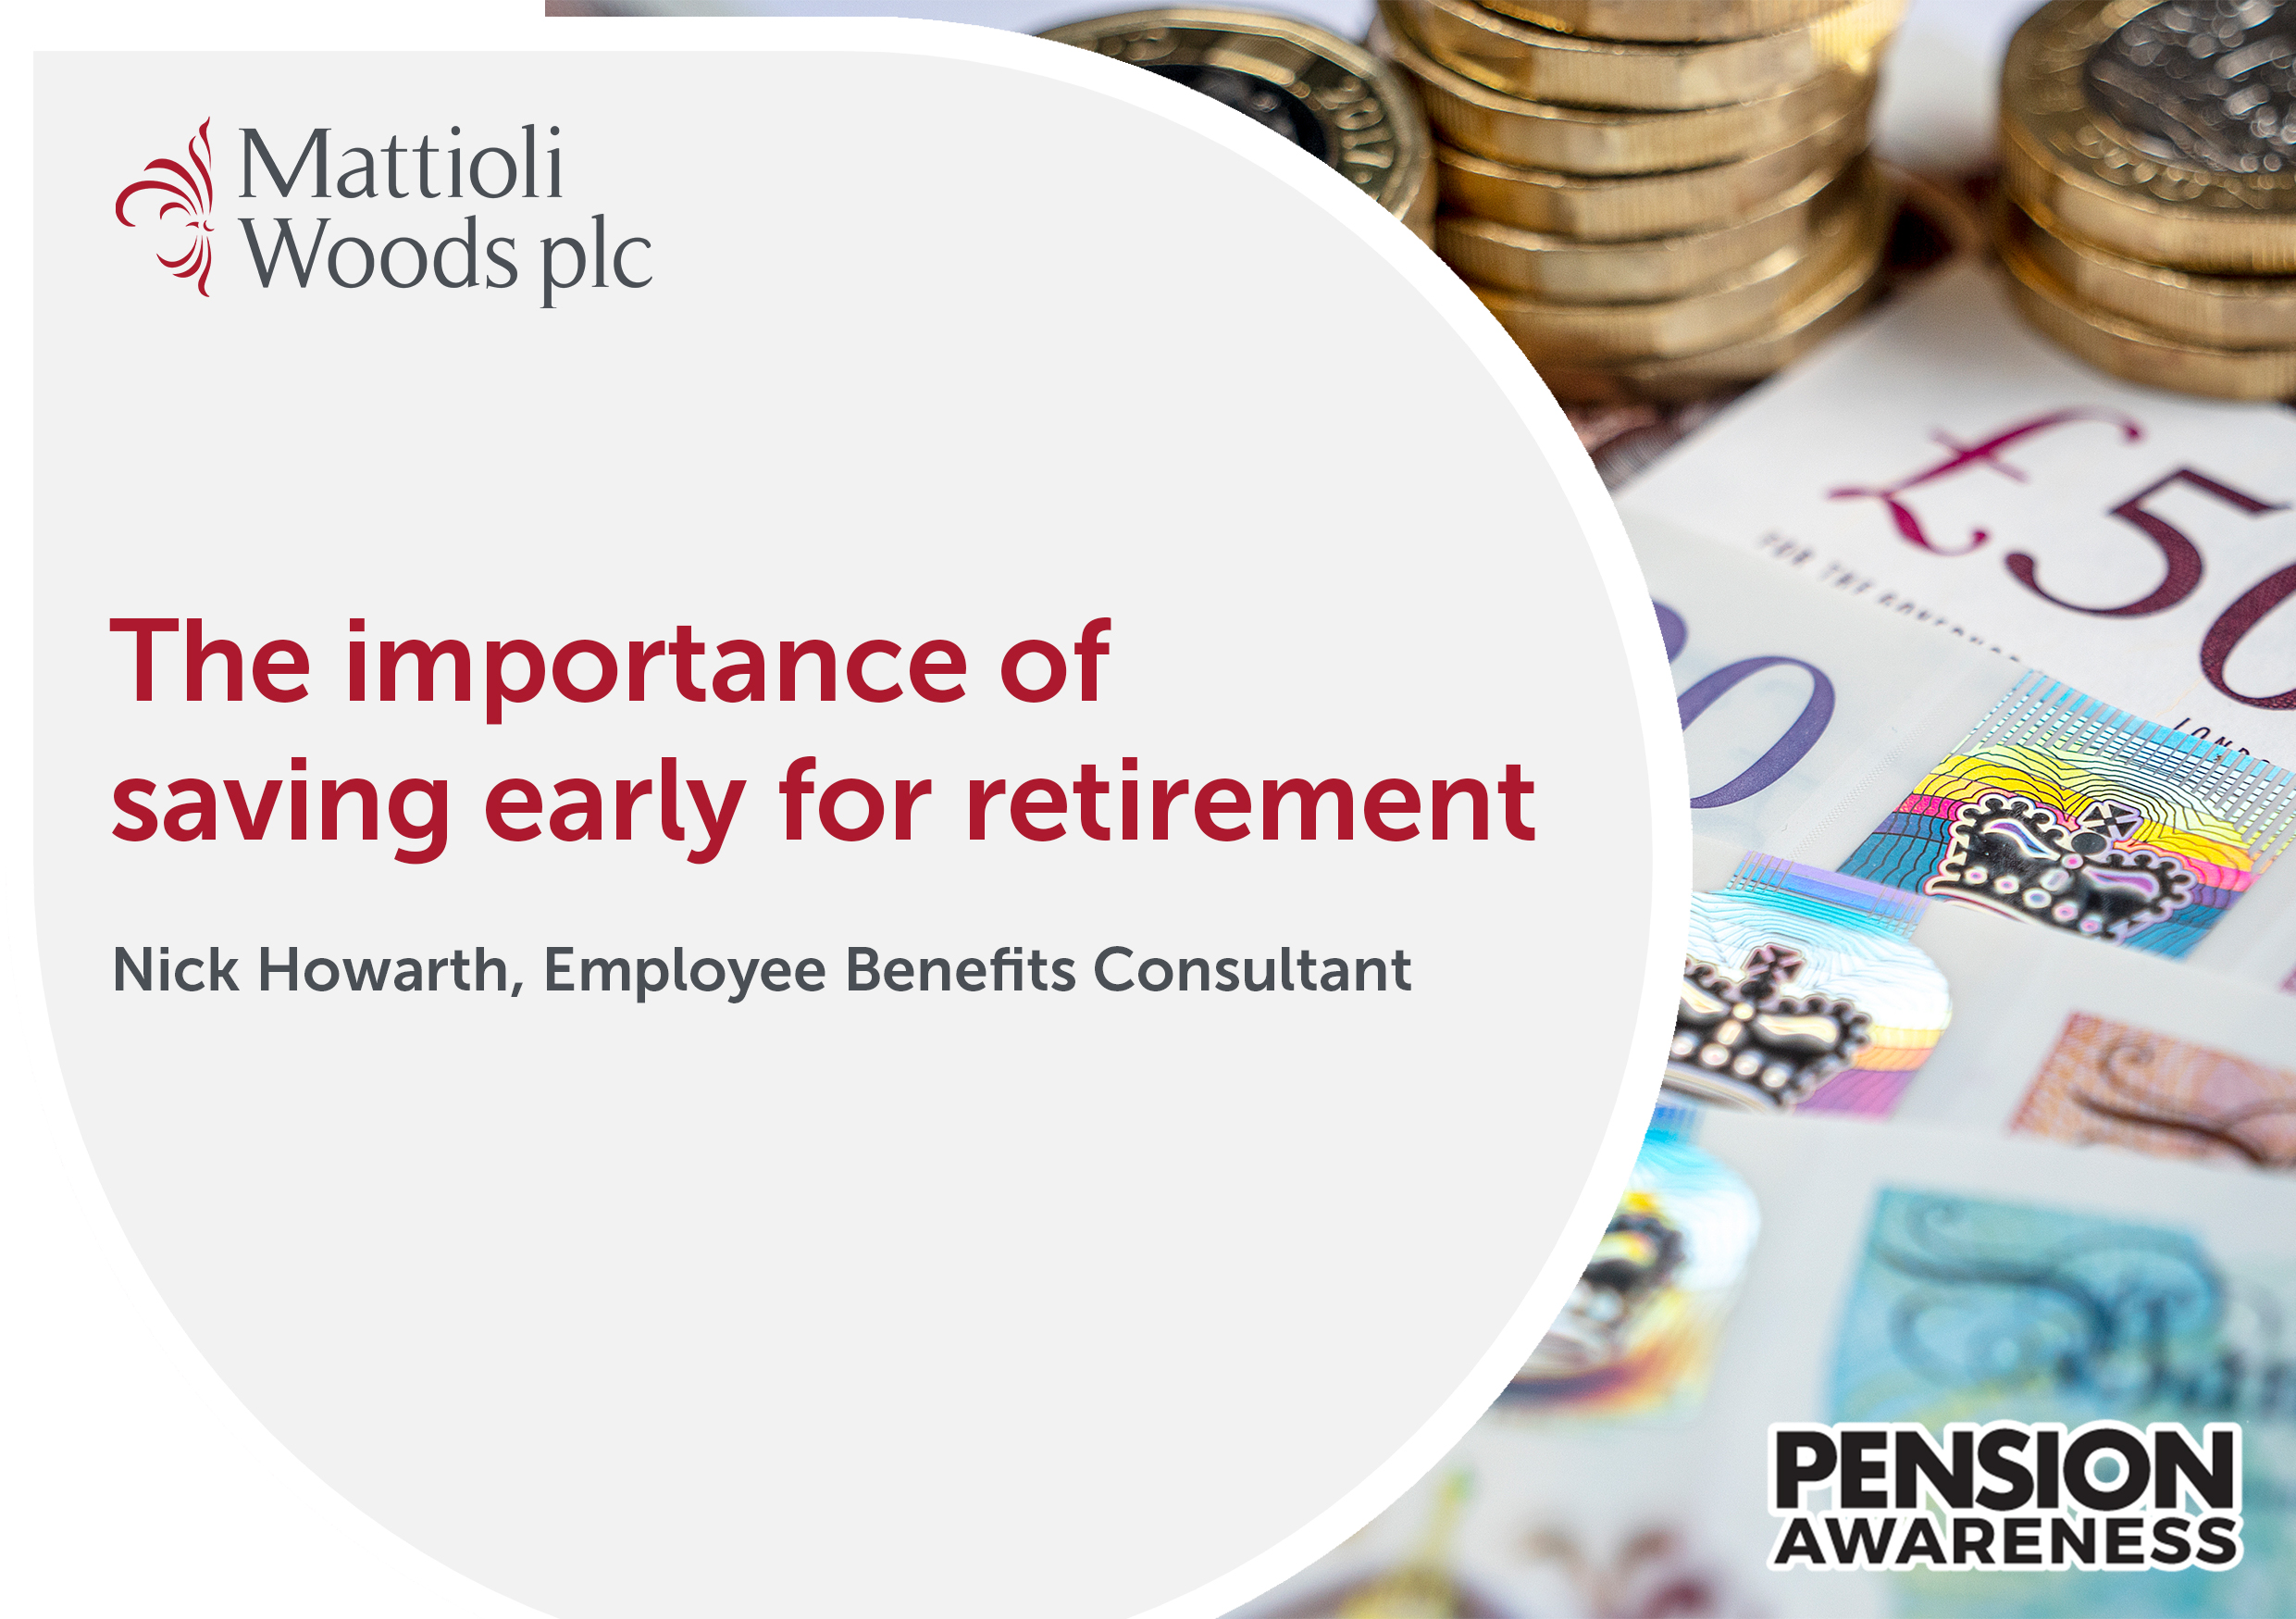 The importance of saving early for retirement